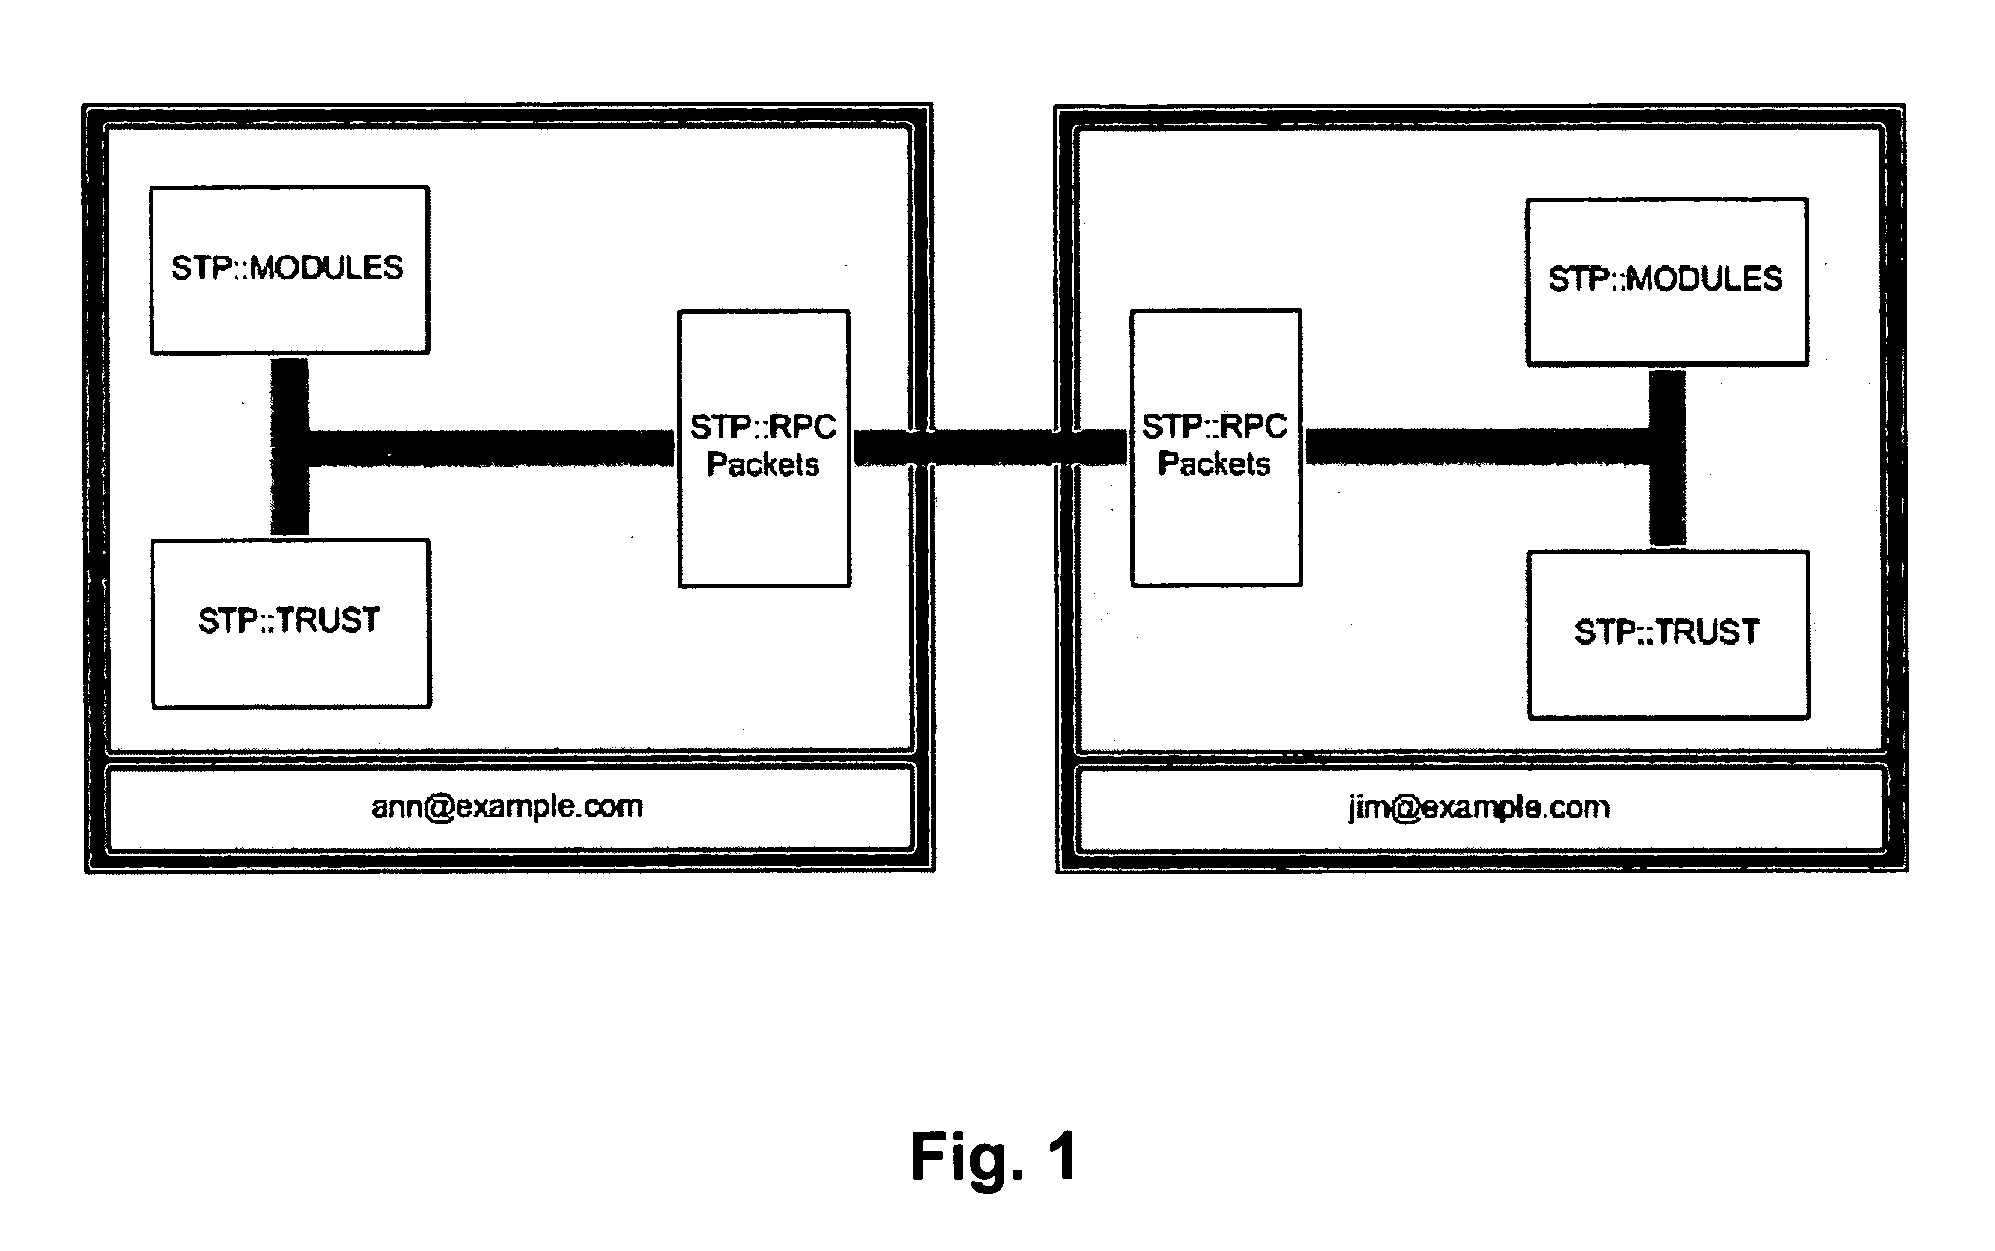 Method of providing secure access to computer resources